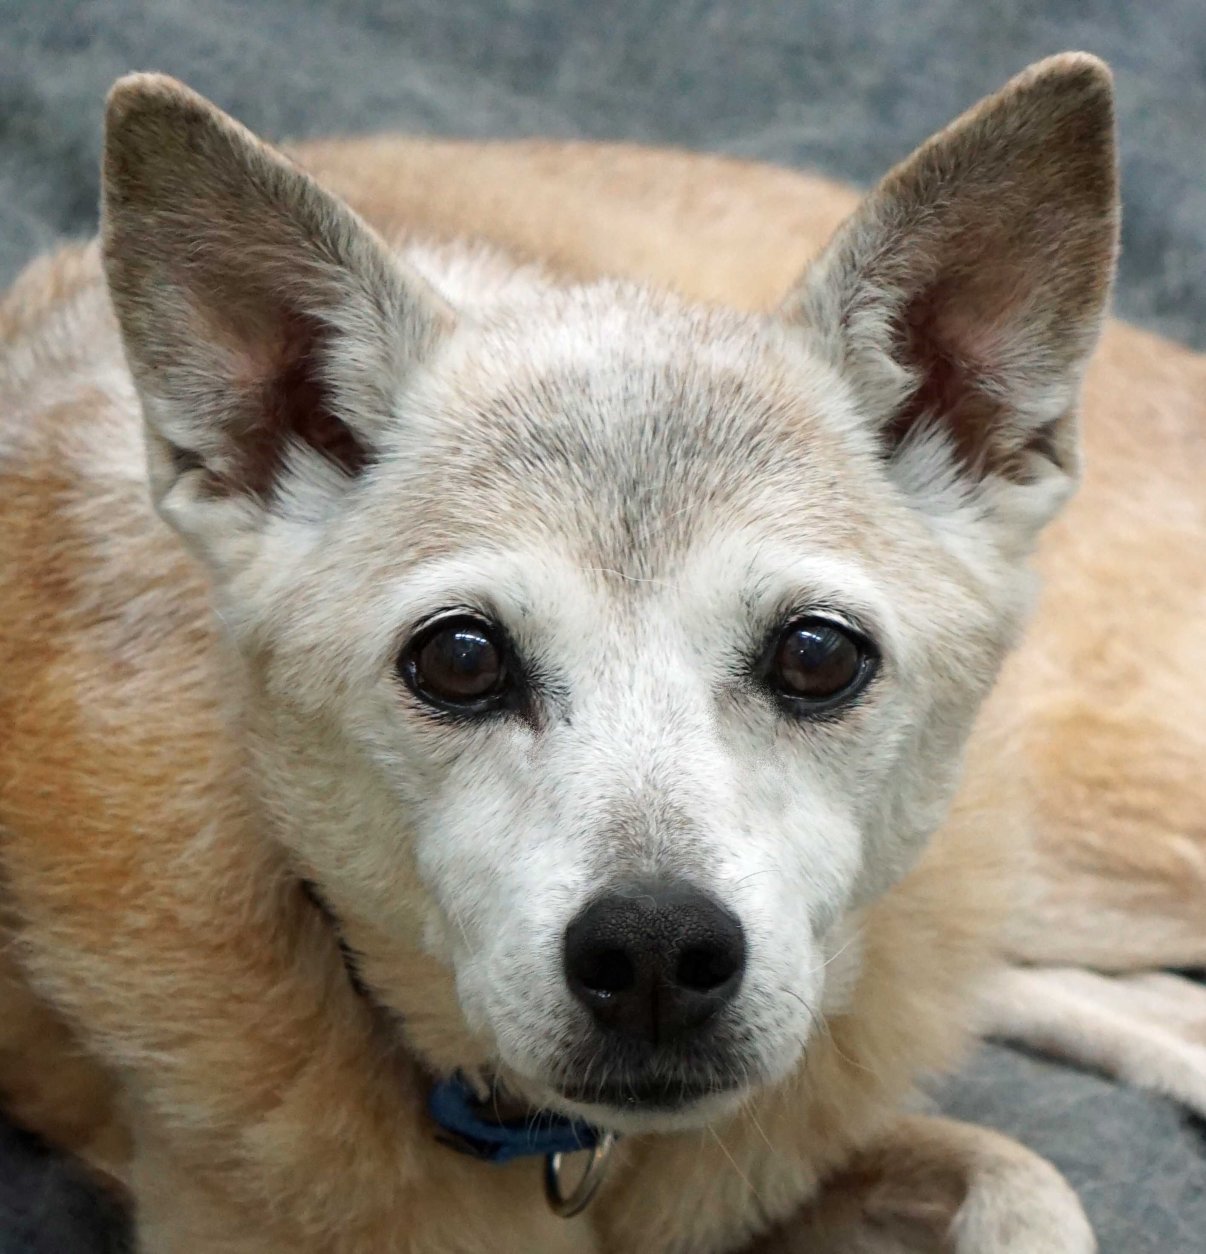 <p><strong>Allie</strong>, a sweet senior girl, also came to HRA when her previous owners could no longer care for her. She was later adopted.</p>
